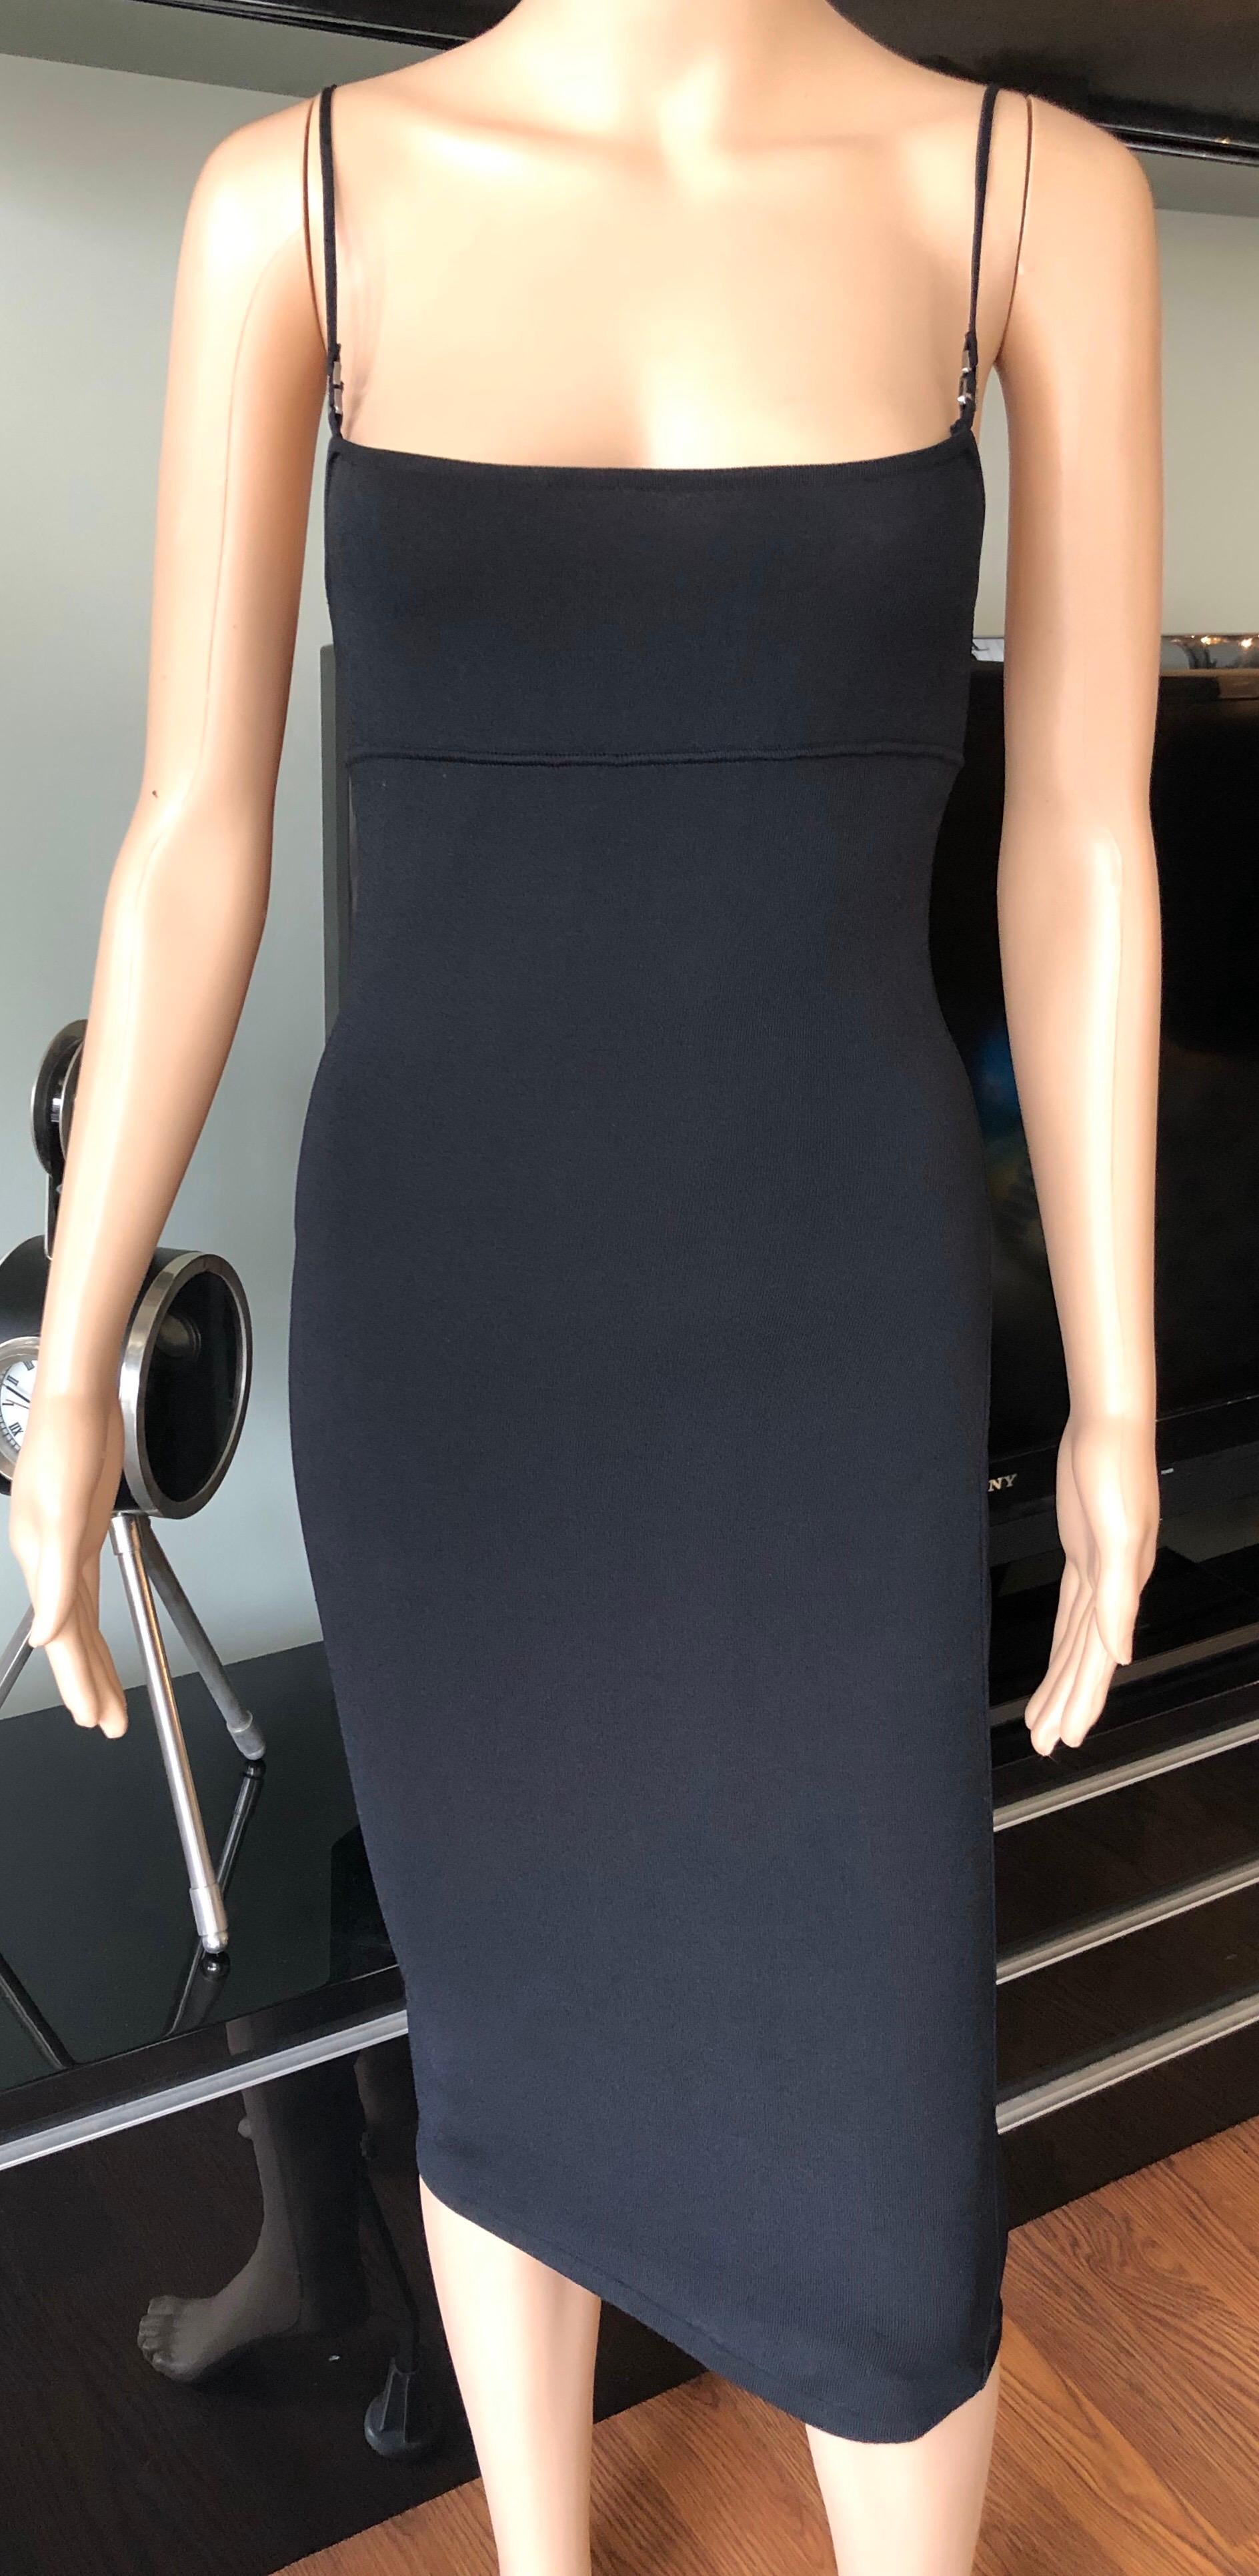 Tom Ford for Gucci 1999 Bodycon Knit Black Midi Dress In Excellent Condition For Sale In Naples, FL